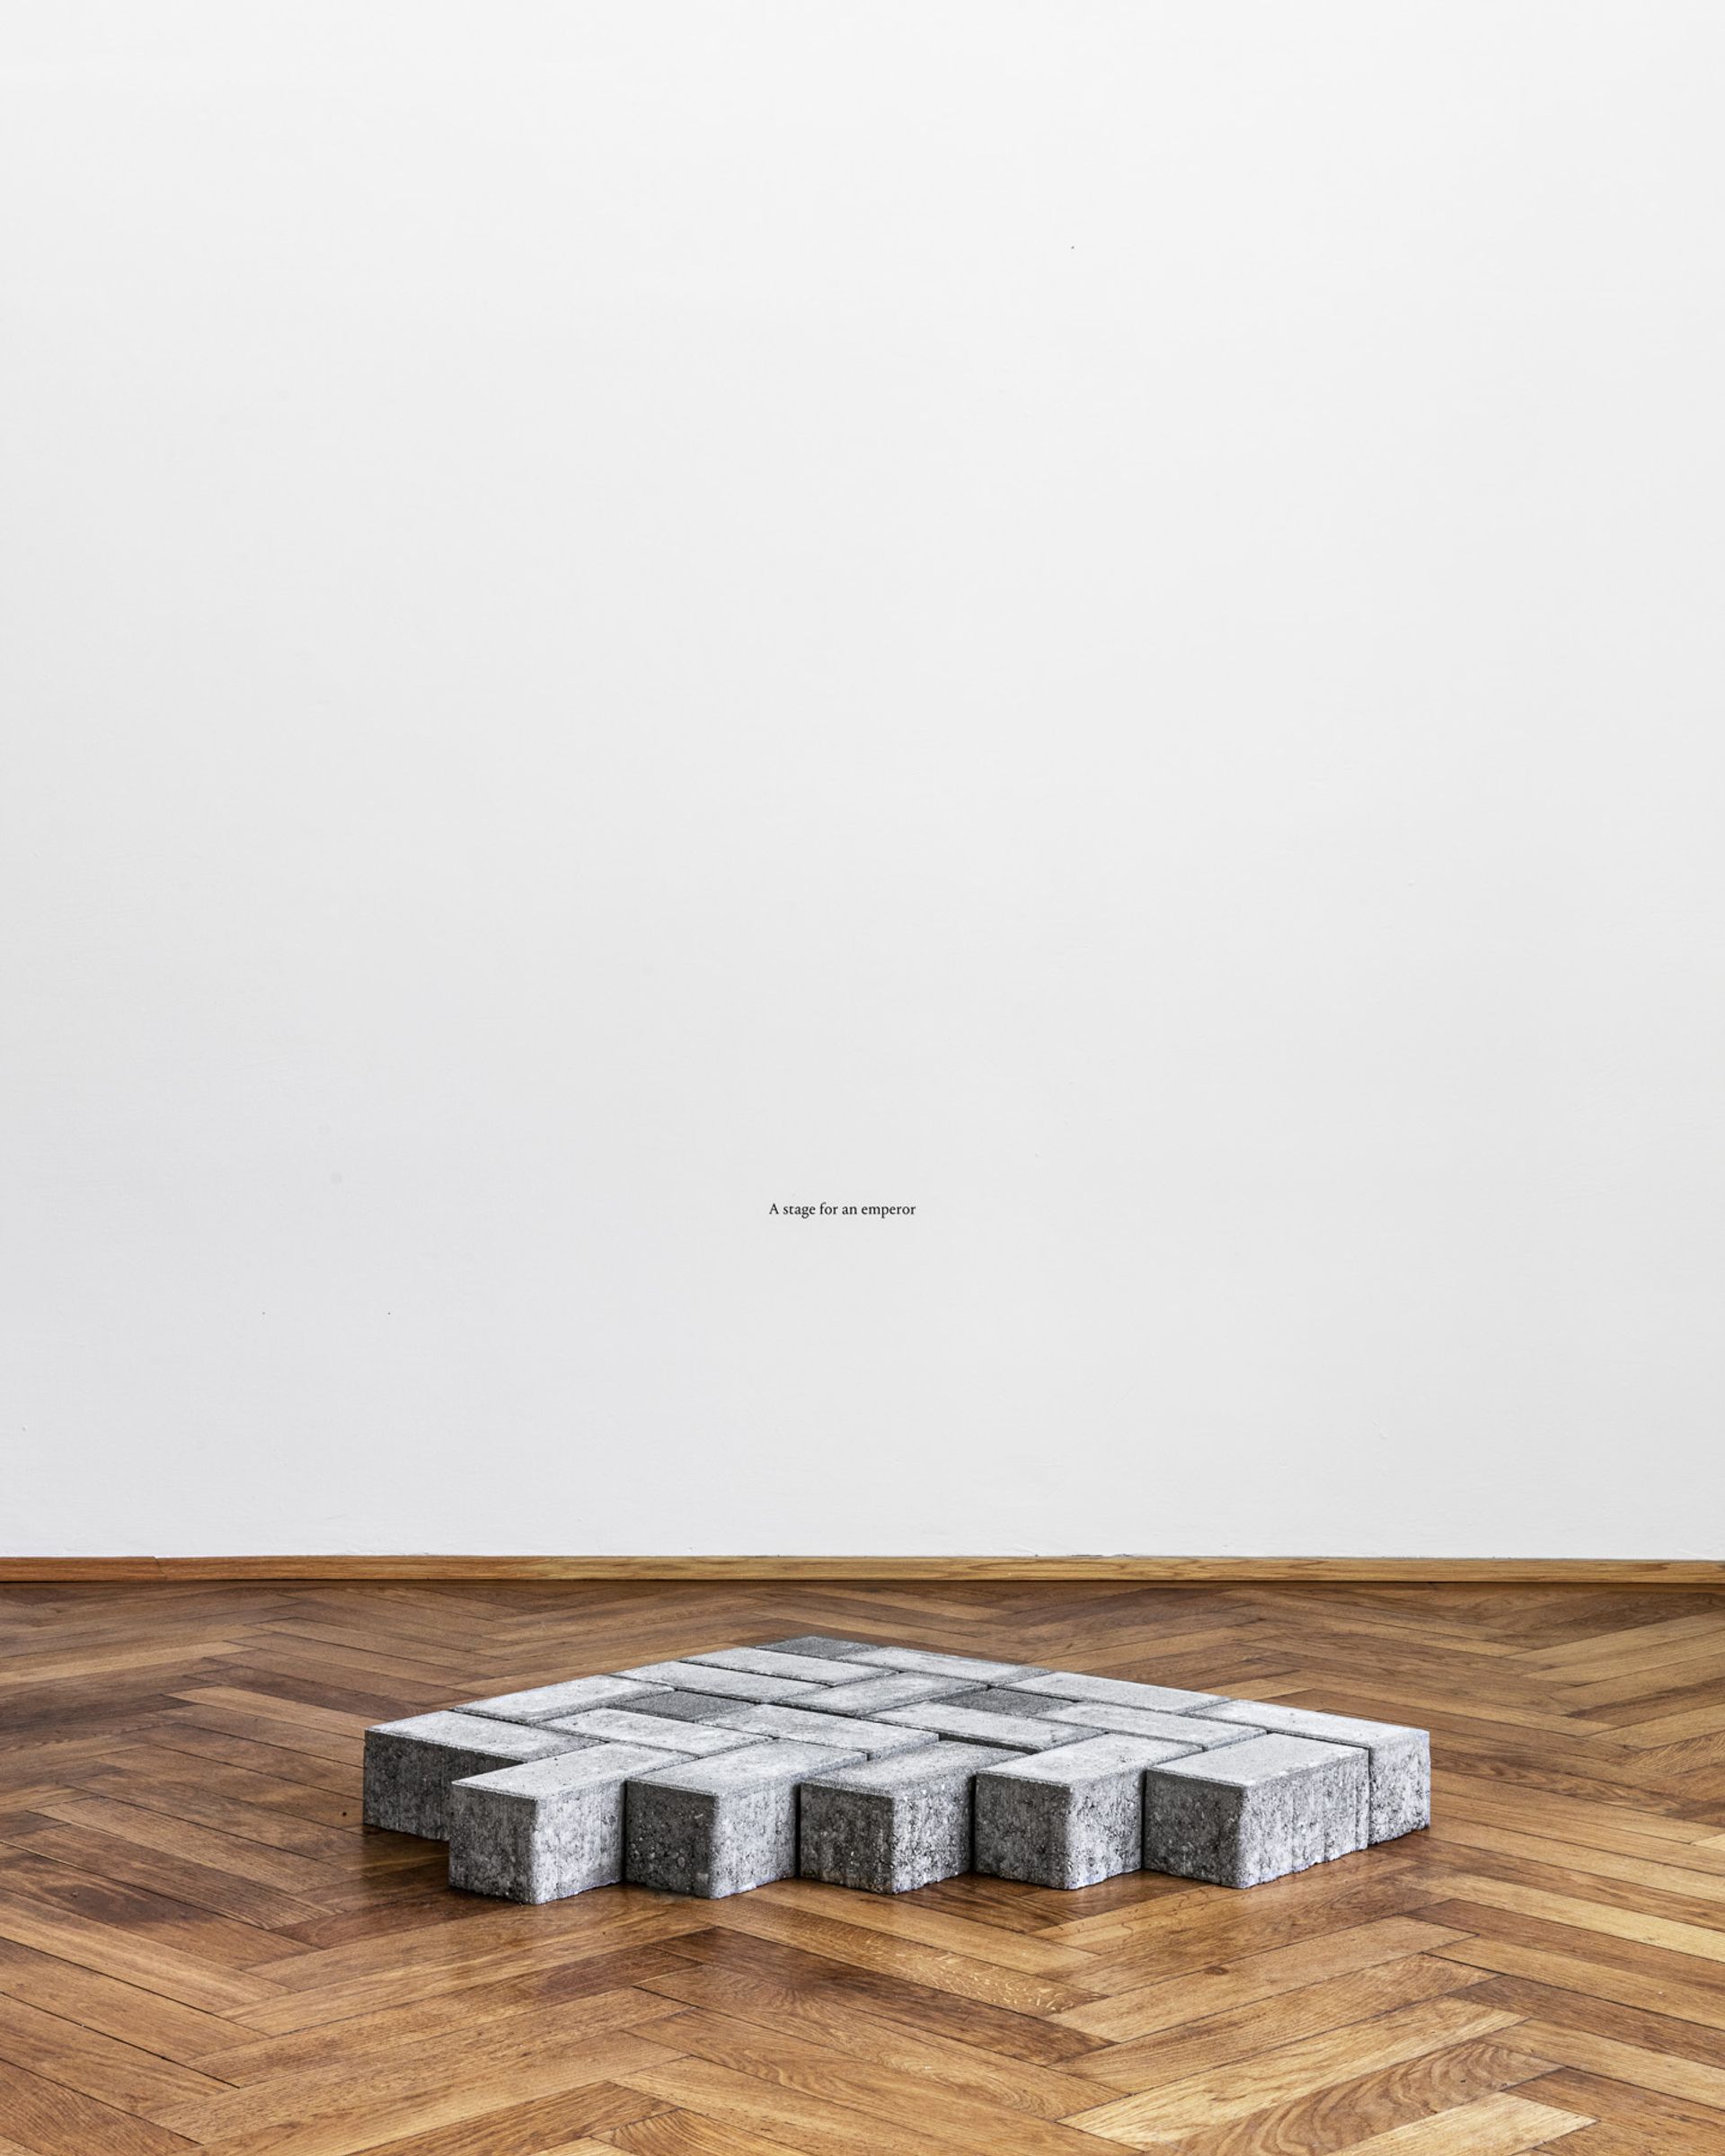 Thomas Geiger, A stage for an emperor, 2017, concrete paving stones, adhesive letters, 70 × 91,5 × 8 cm